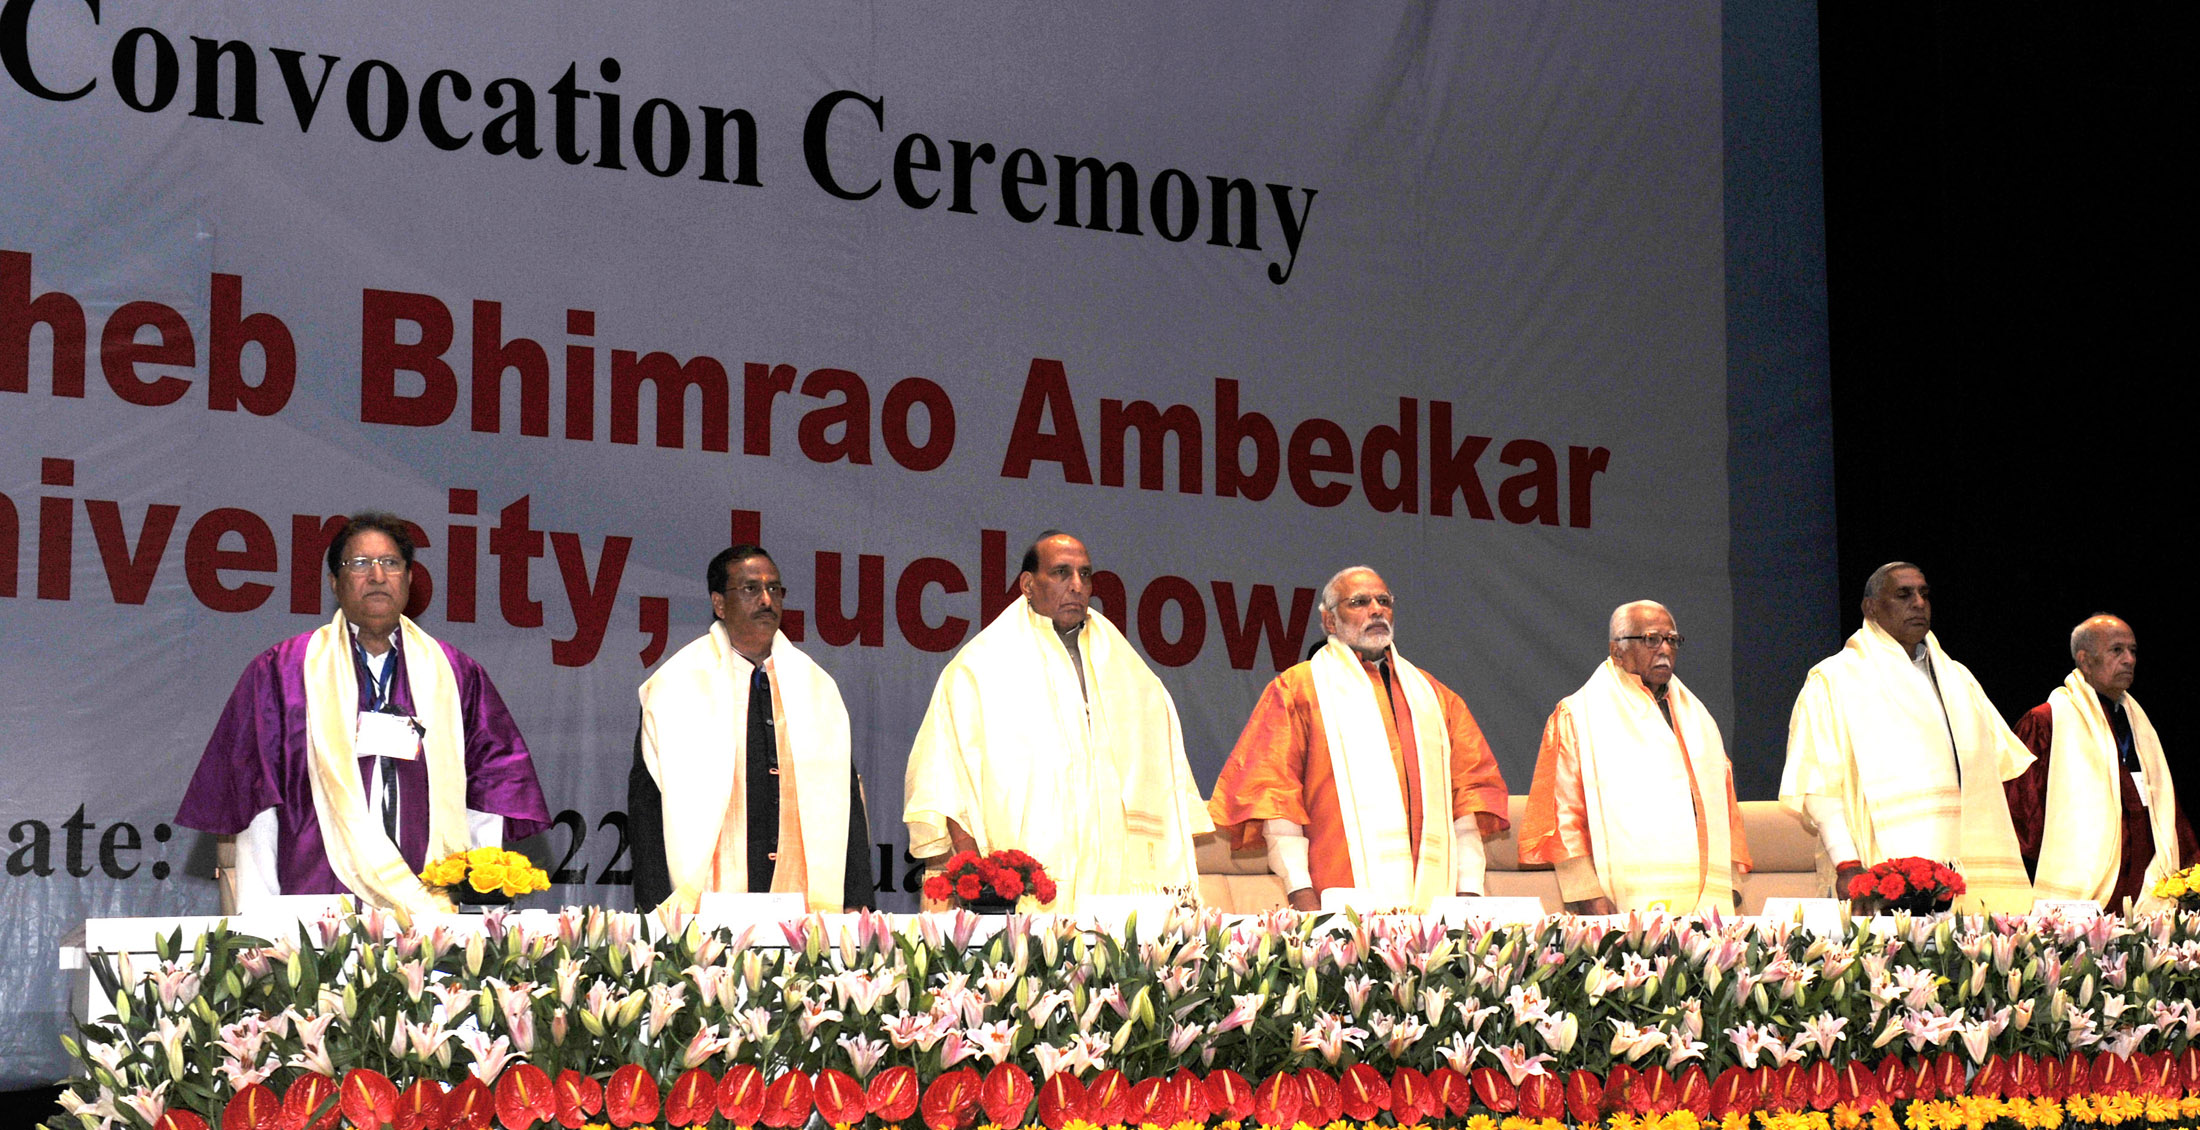 The Prime Minister, Shri Narendra Modi at the 6th Convocation of Babasaheb Bhimrao Ambedkar University, at Lucknow, in Uttar Pradesh on January 22, 2016. 	The Governor of Uttar Pradesh, Shri Ram Naik, the Union Home Minister, Shri Rajnath Singh and other dignitaries are also seen.